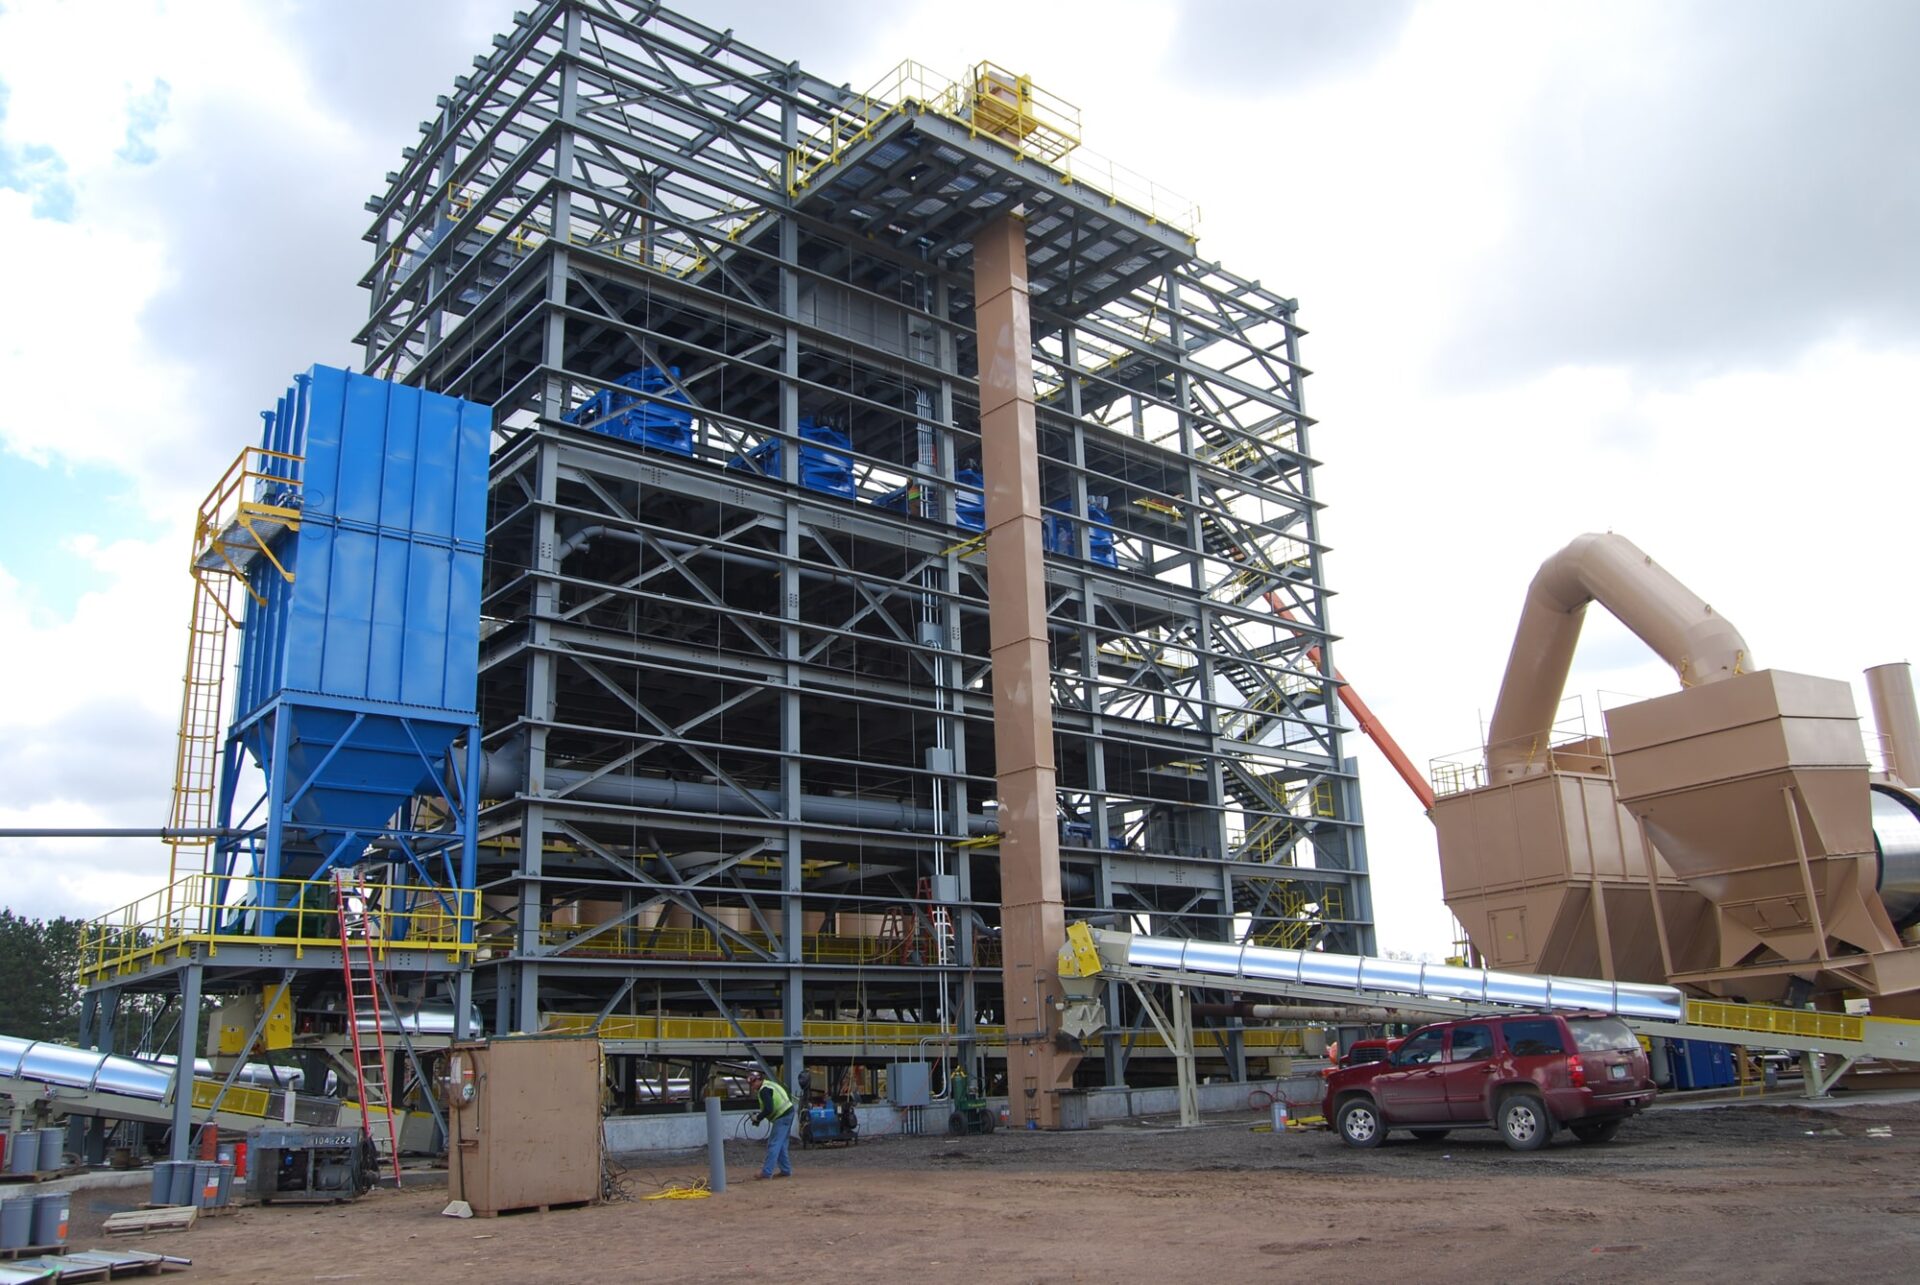 A dry plant being built